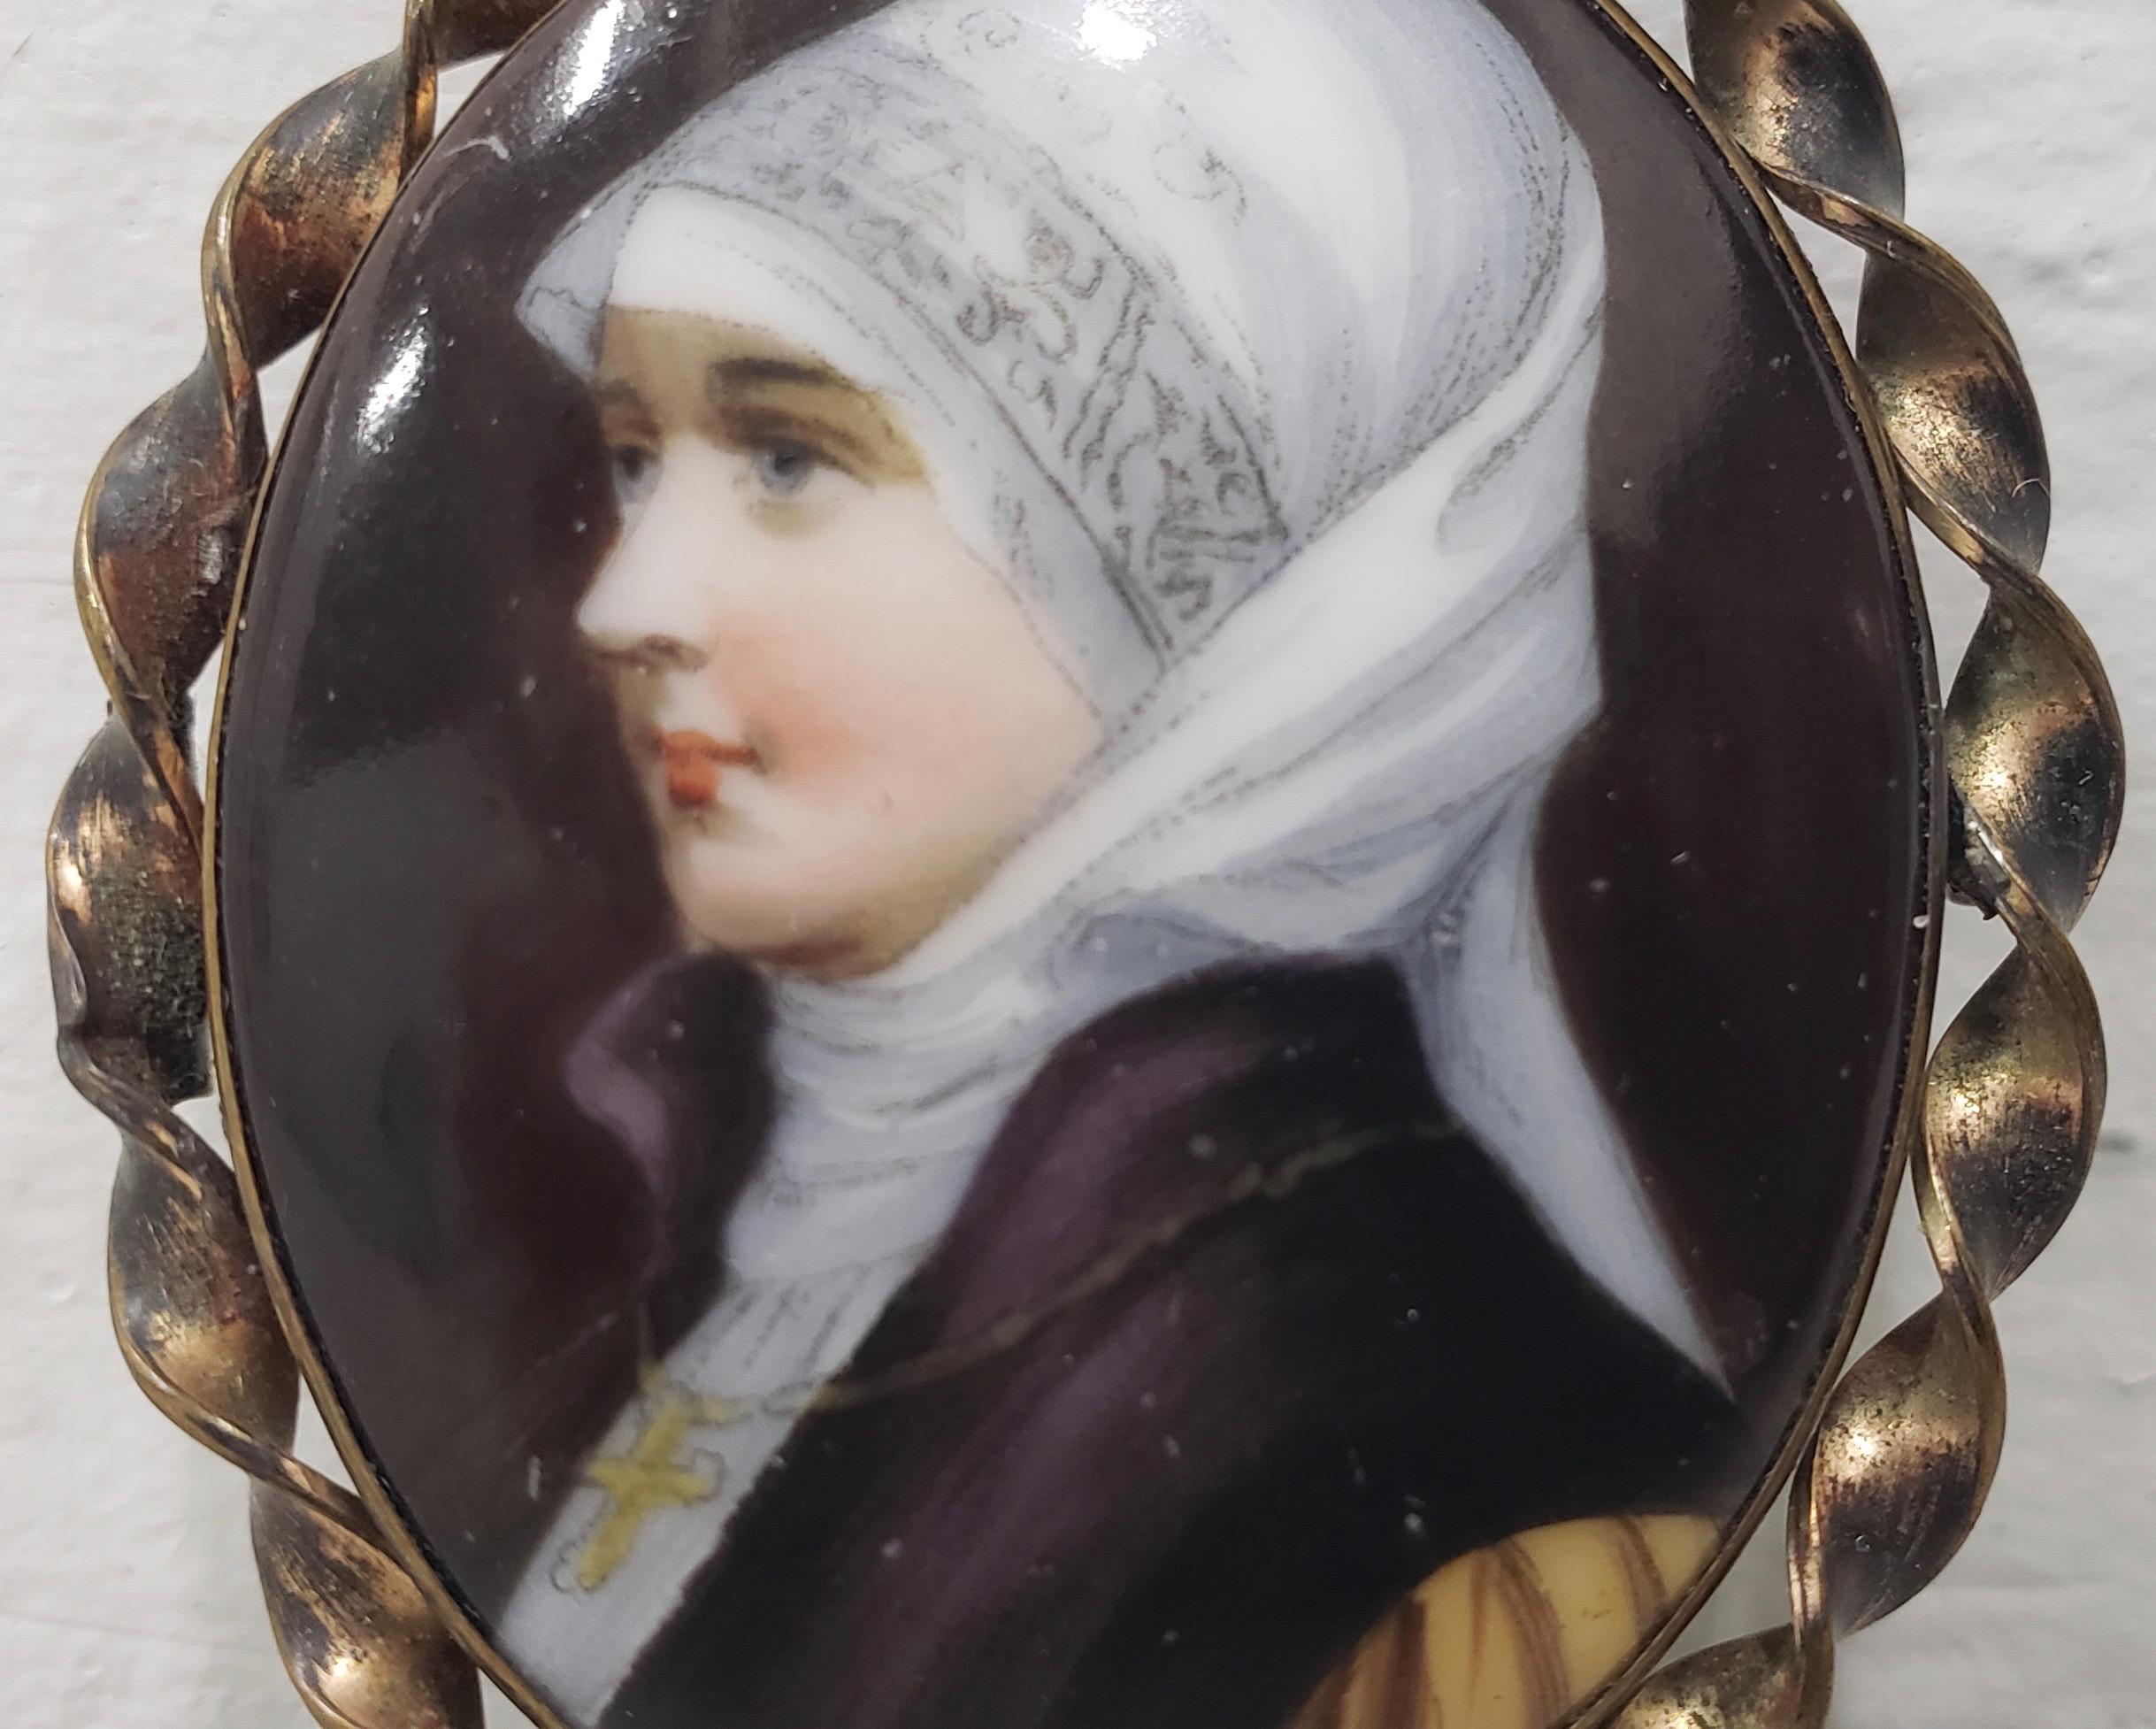 19th century miniature portrait of a nun on porcelain with brooch frame

Wonderful antique portrait of a nun hand painted on porcelain.

The portrait is housed in a brass frame that can be worn as a brooch.

Porcelain dimensions 1.25